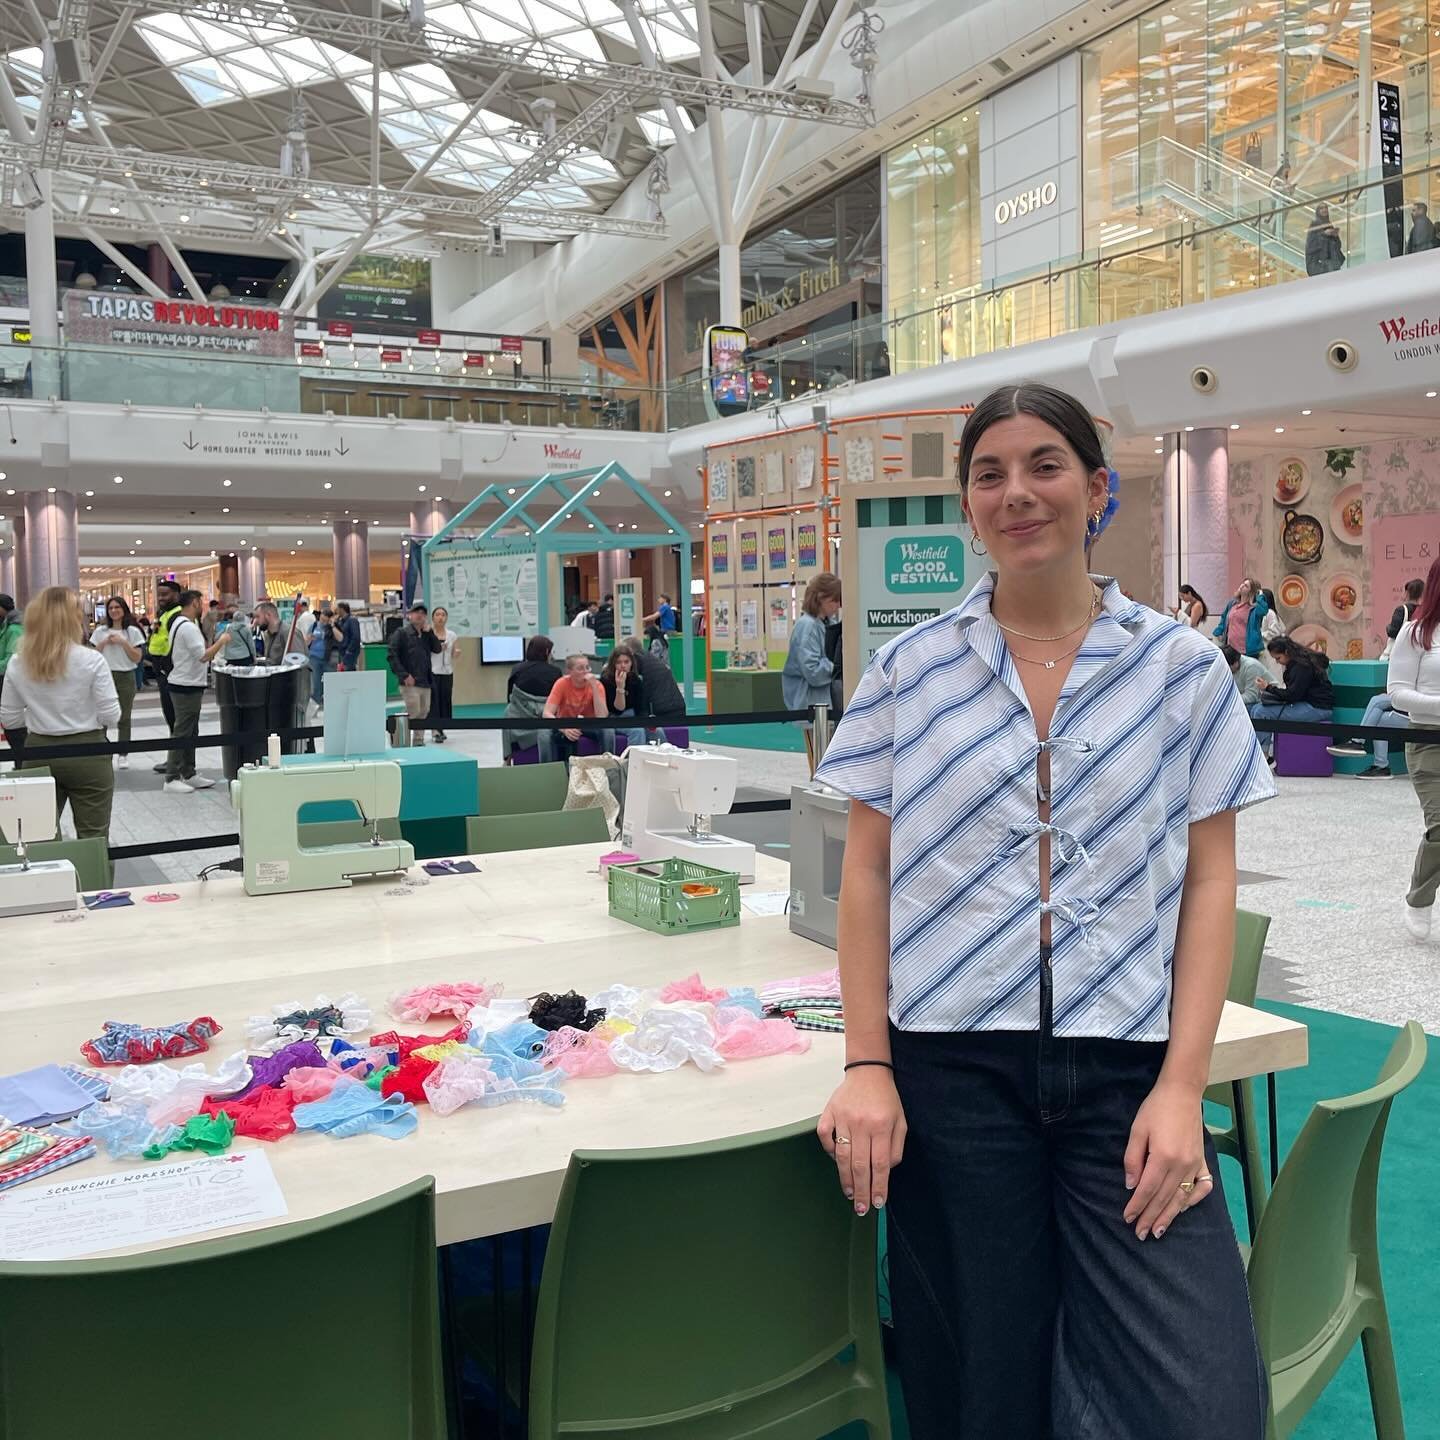 A super cute scrunchie workshop at @westfieldlondon full of babes 🎀💕🌷✨💘🌸♻️

Most people that came hasn&rsquo;t used a sewing machine before so they get a little lesson and practice before we start. And then leave with not only a cute scrunchie b